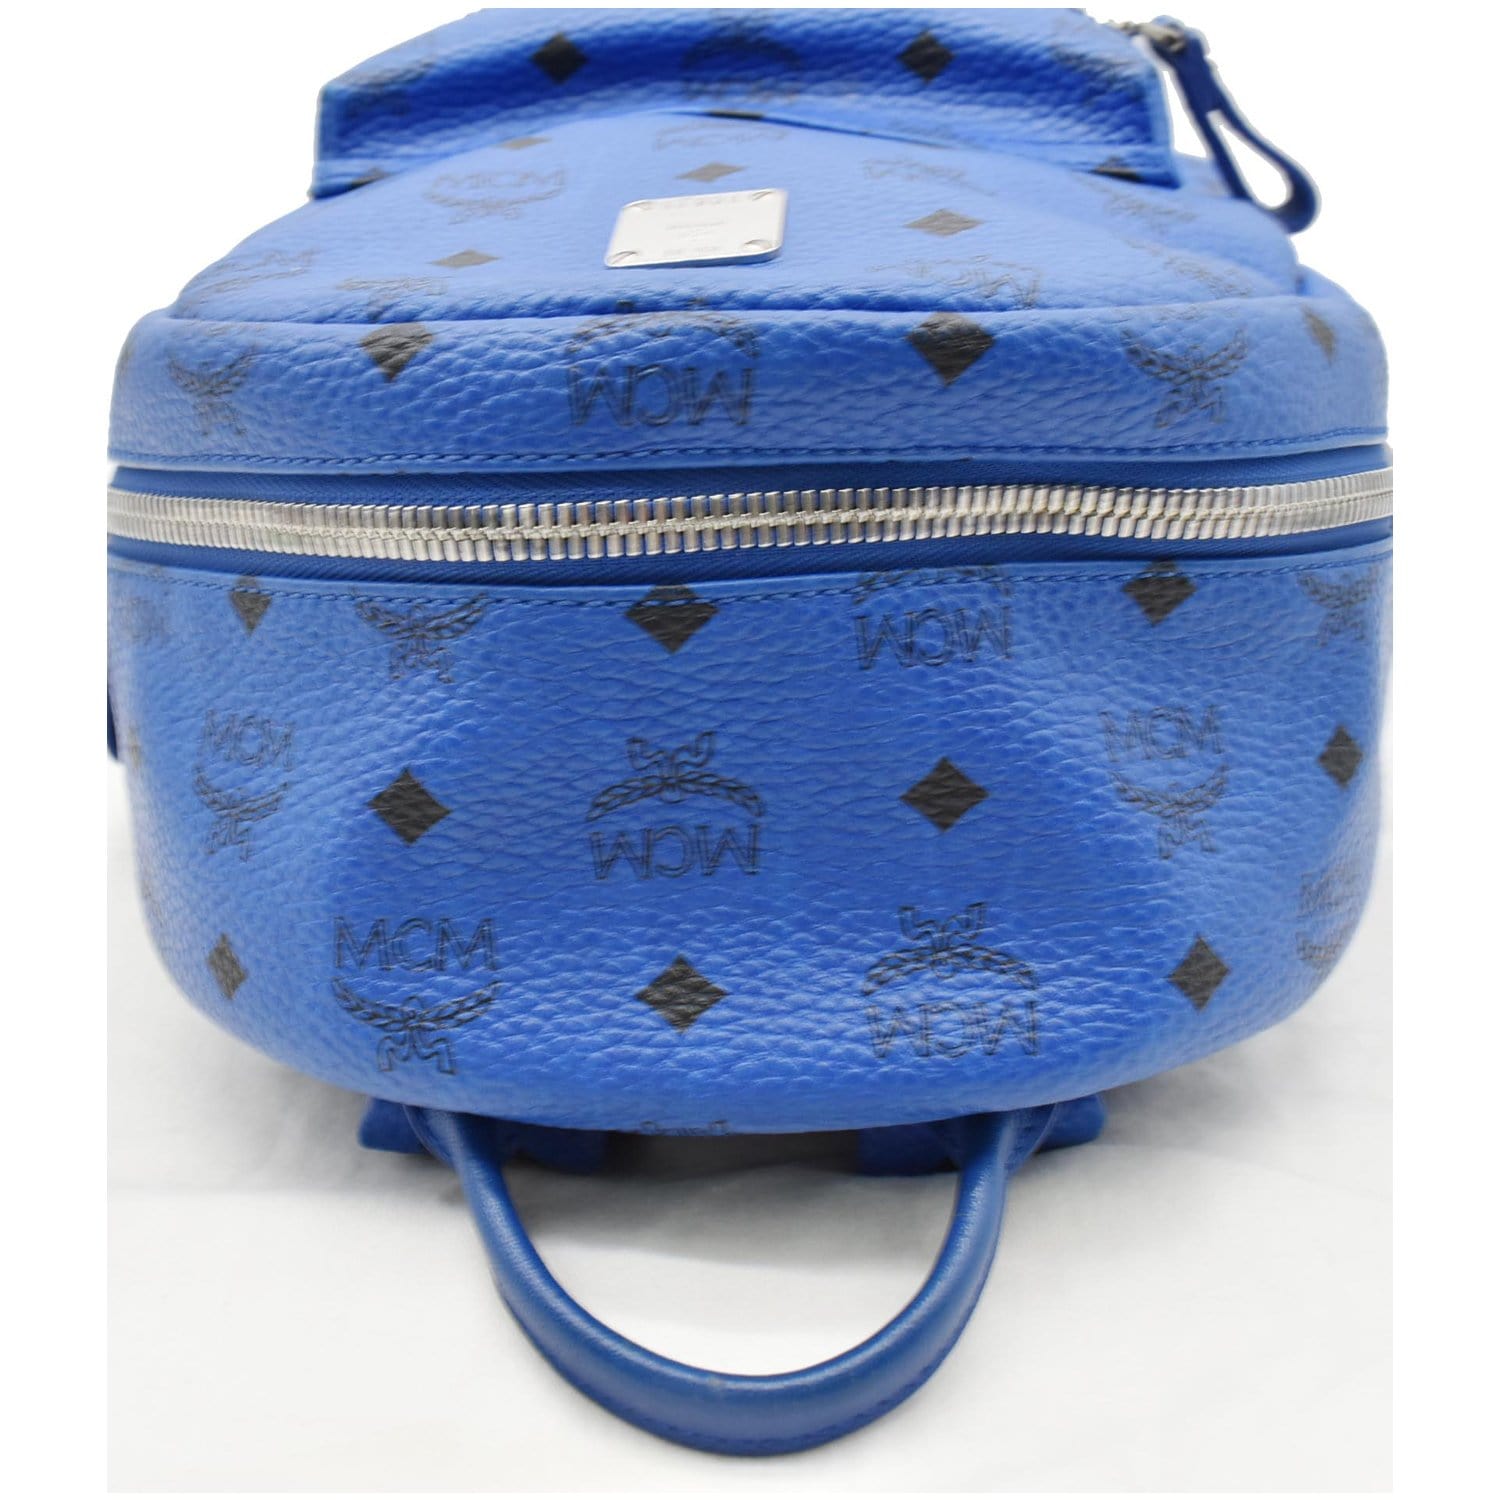 Cloth backpack MCM Blue in Cloth - 28177408